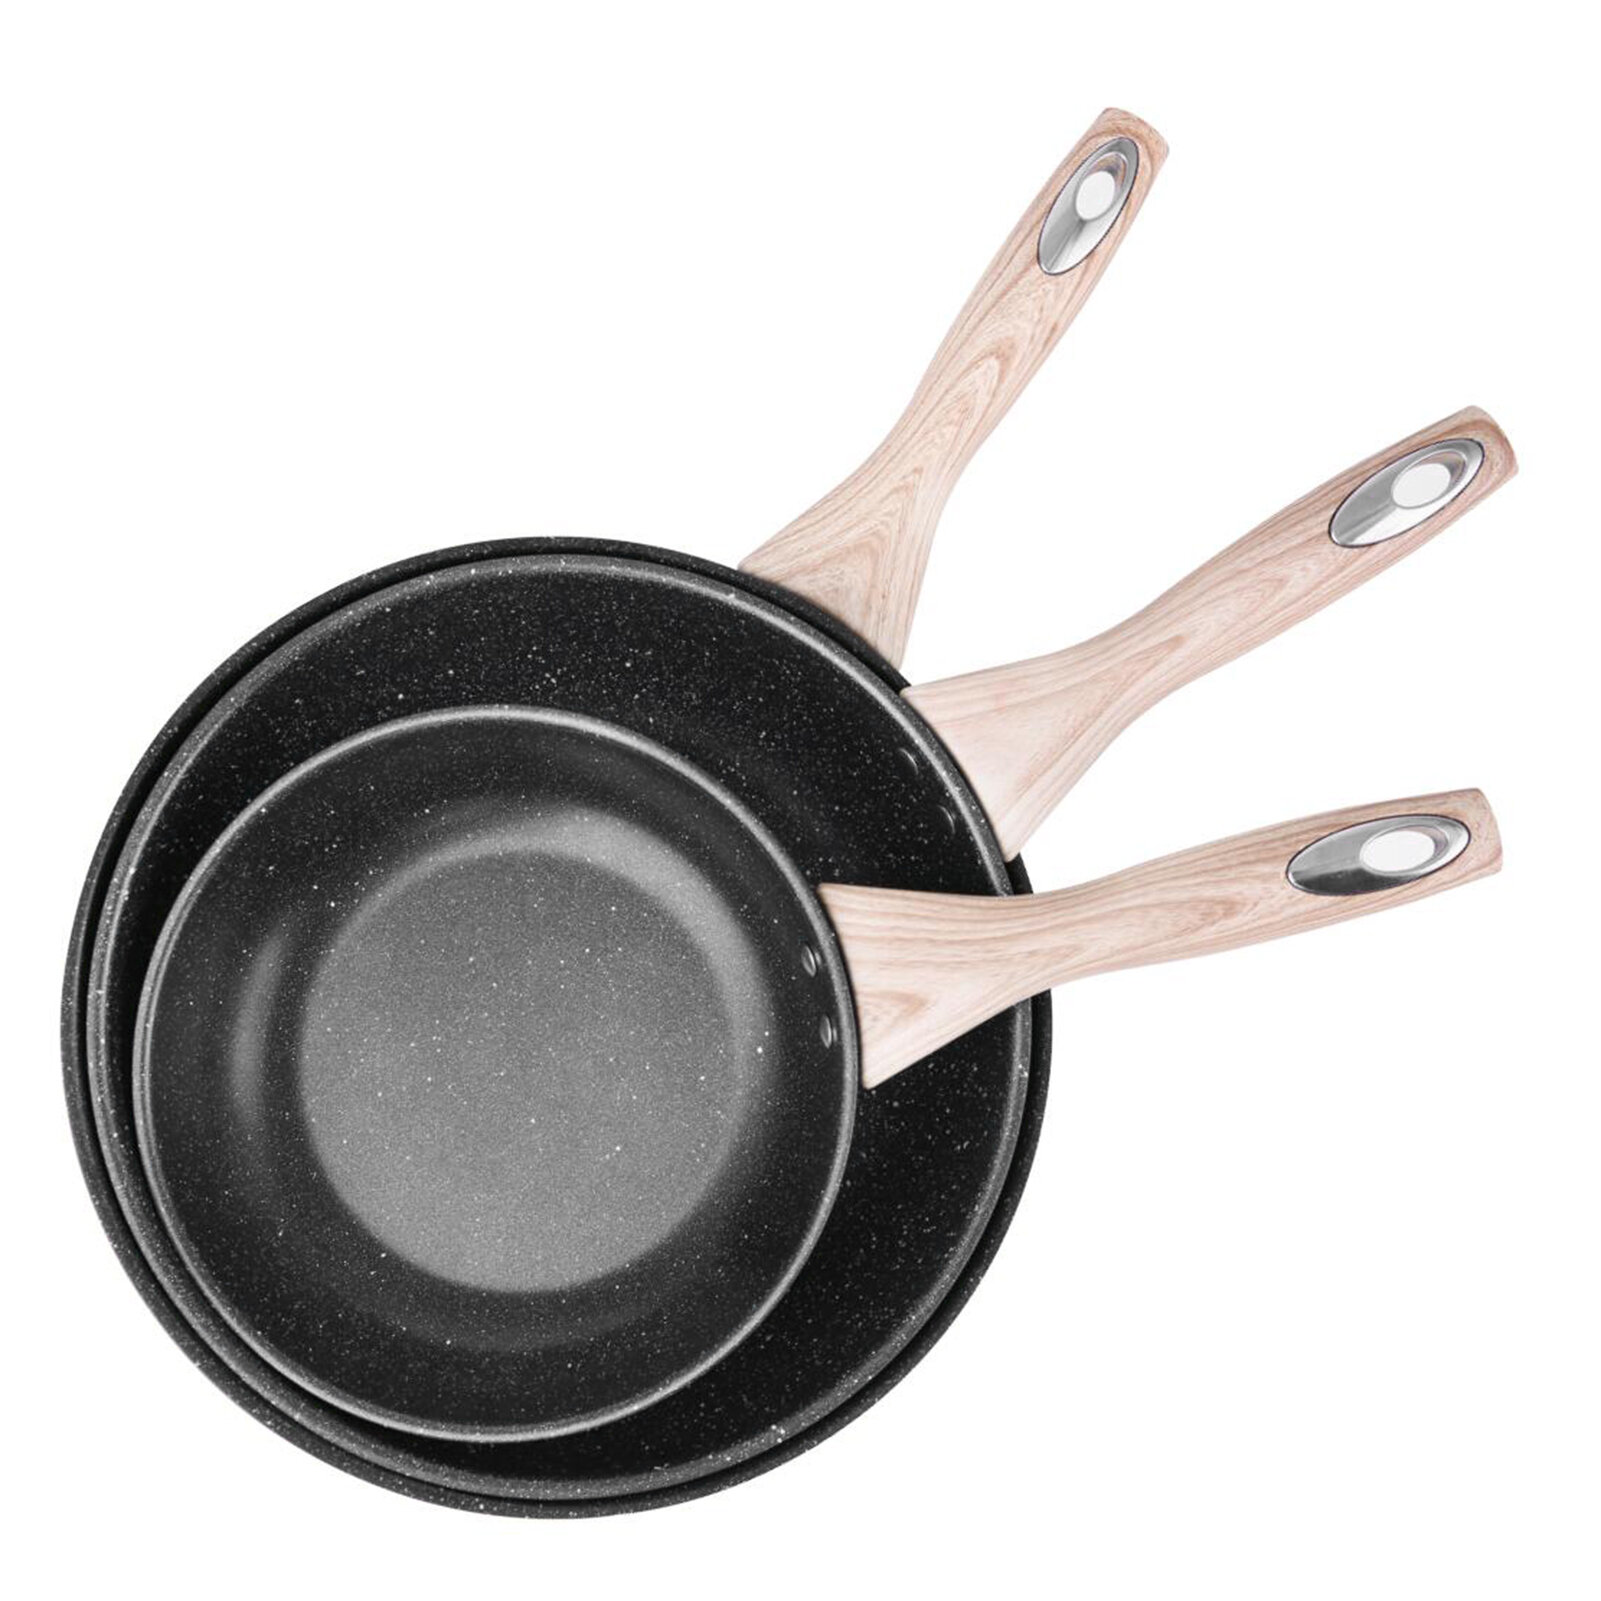 Does Cast Iron Work on Induction? - The Cookware Geek